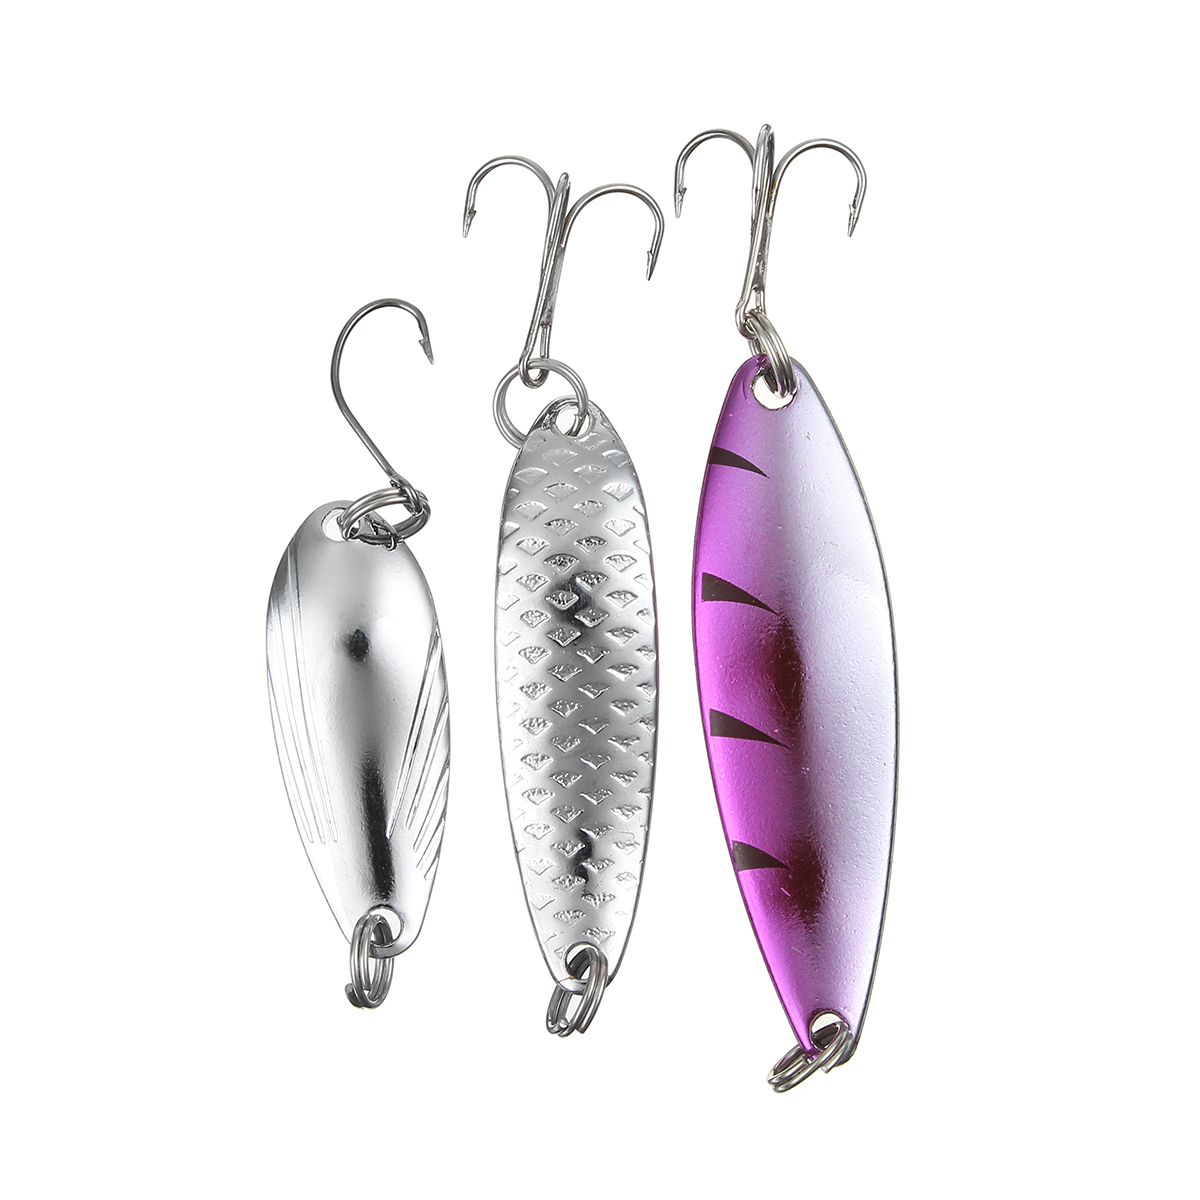 ZANLURE-100-Pcs-Fishing-Lures-Sea-Fishing-Baits-Perch-Salmon-Pike-Trout-Spinners-Tackle-Hook-Fishing-1813859-6